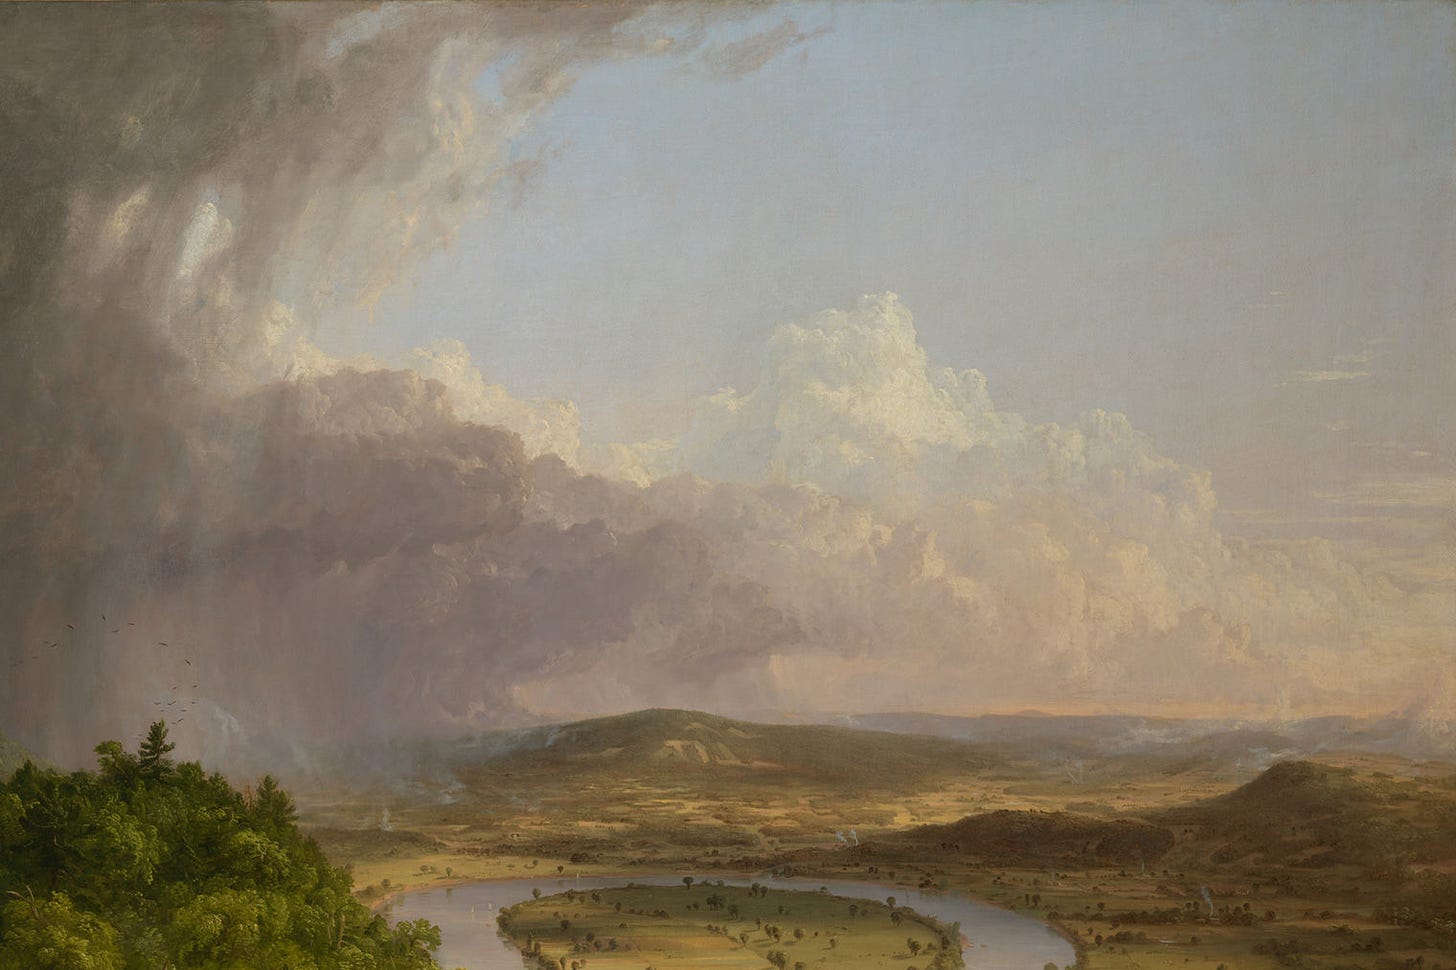 The soul of all scenery": Thomas Cole's Clouds | The Metropolitan Museum of  Art